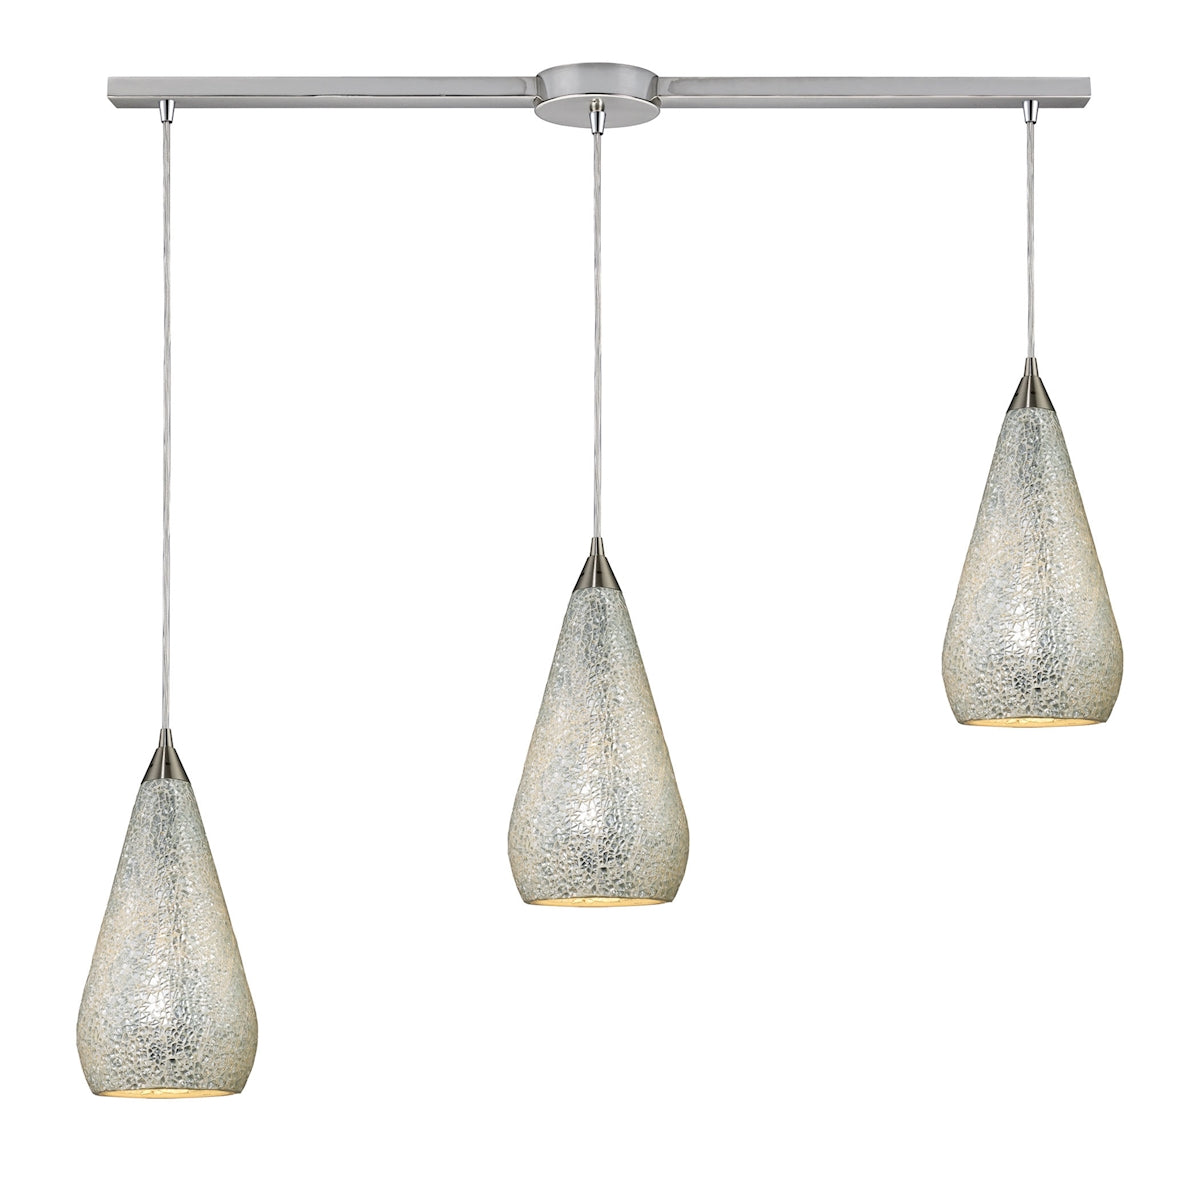 ELK Lighting 546-3L-SLV-CRC Curvalo 3-Light Linear Pendant Fixture in Satin Nickel with Silver Crackle Glass